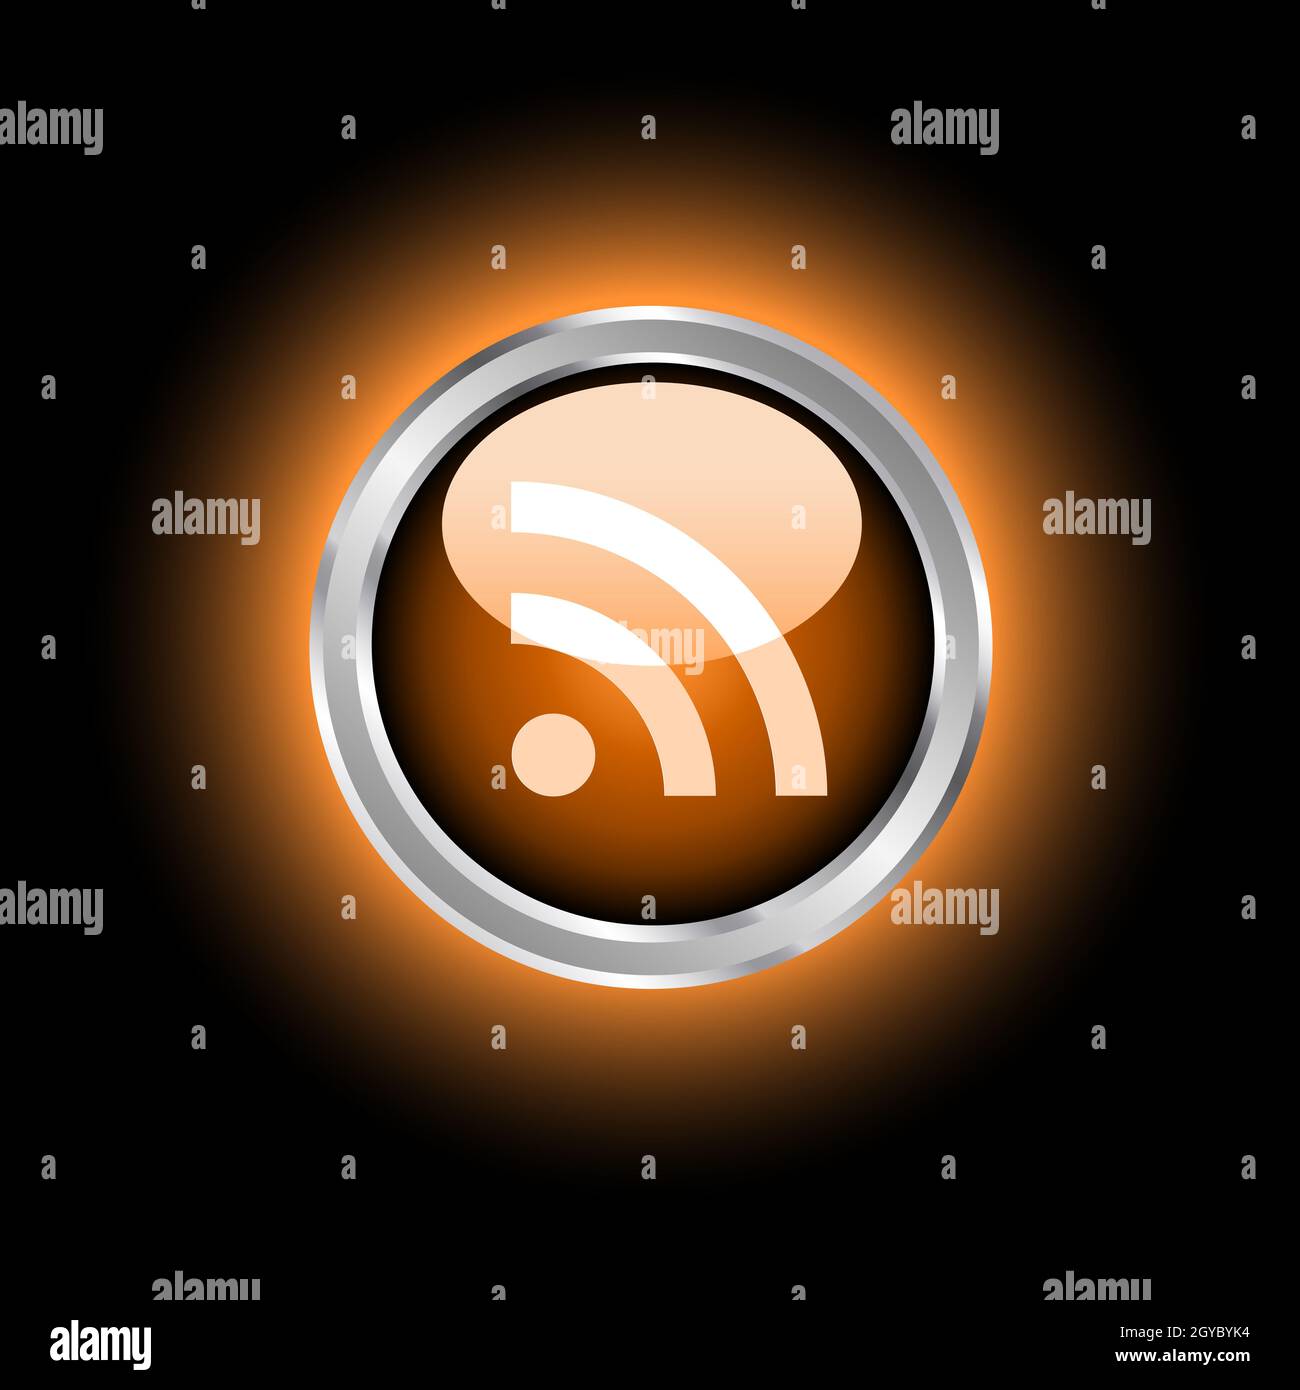 Glowing RSS button Stock Photo